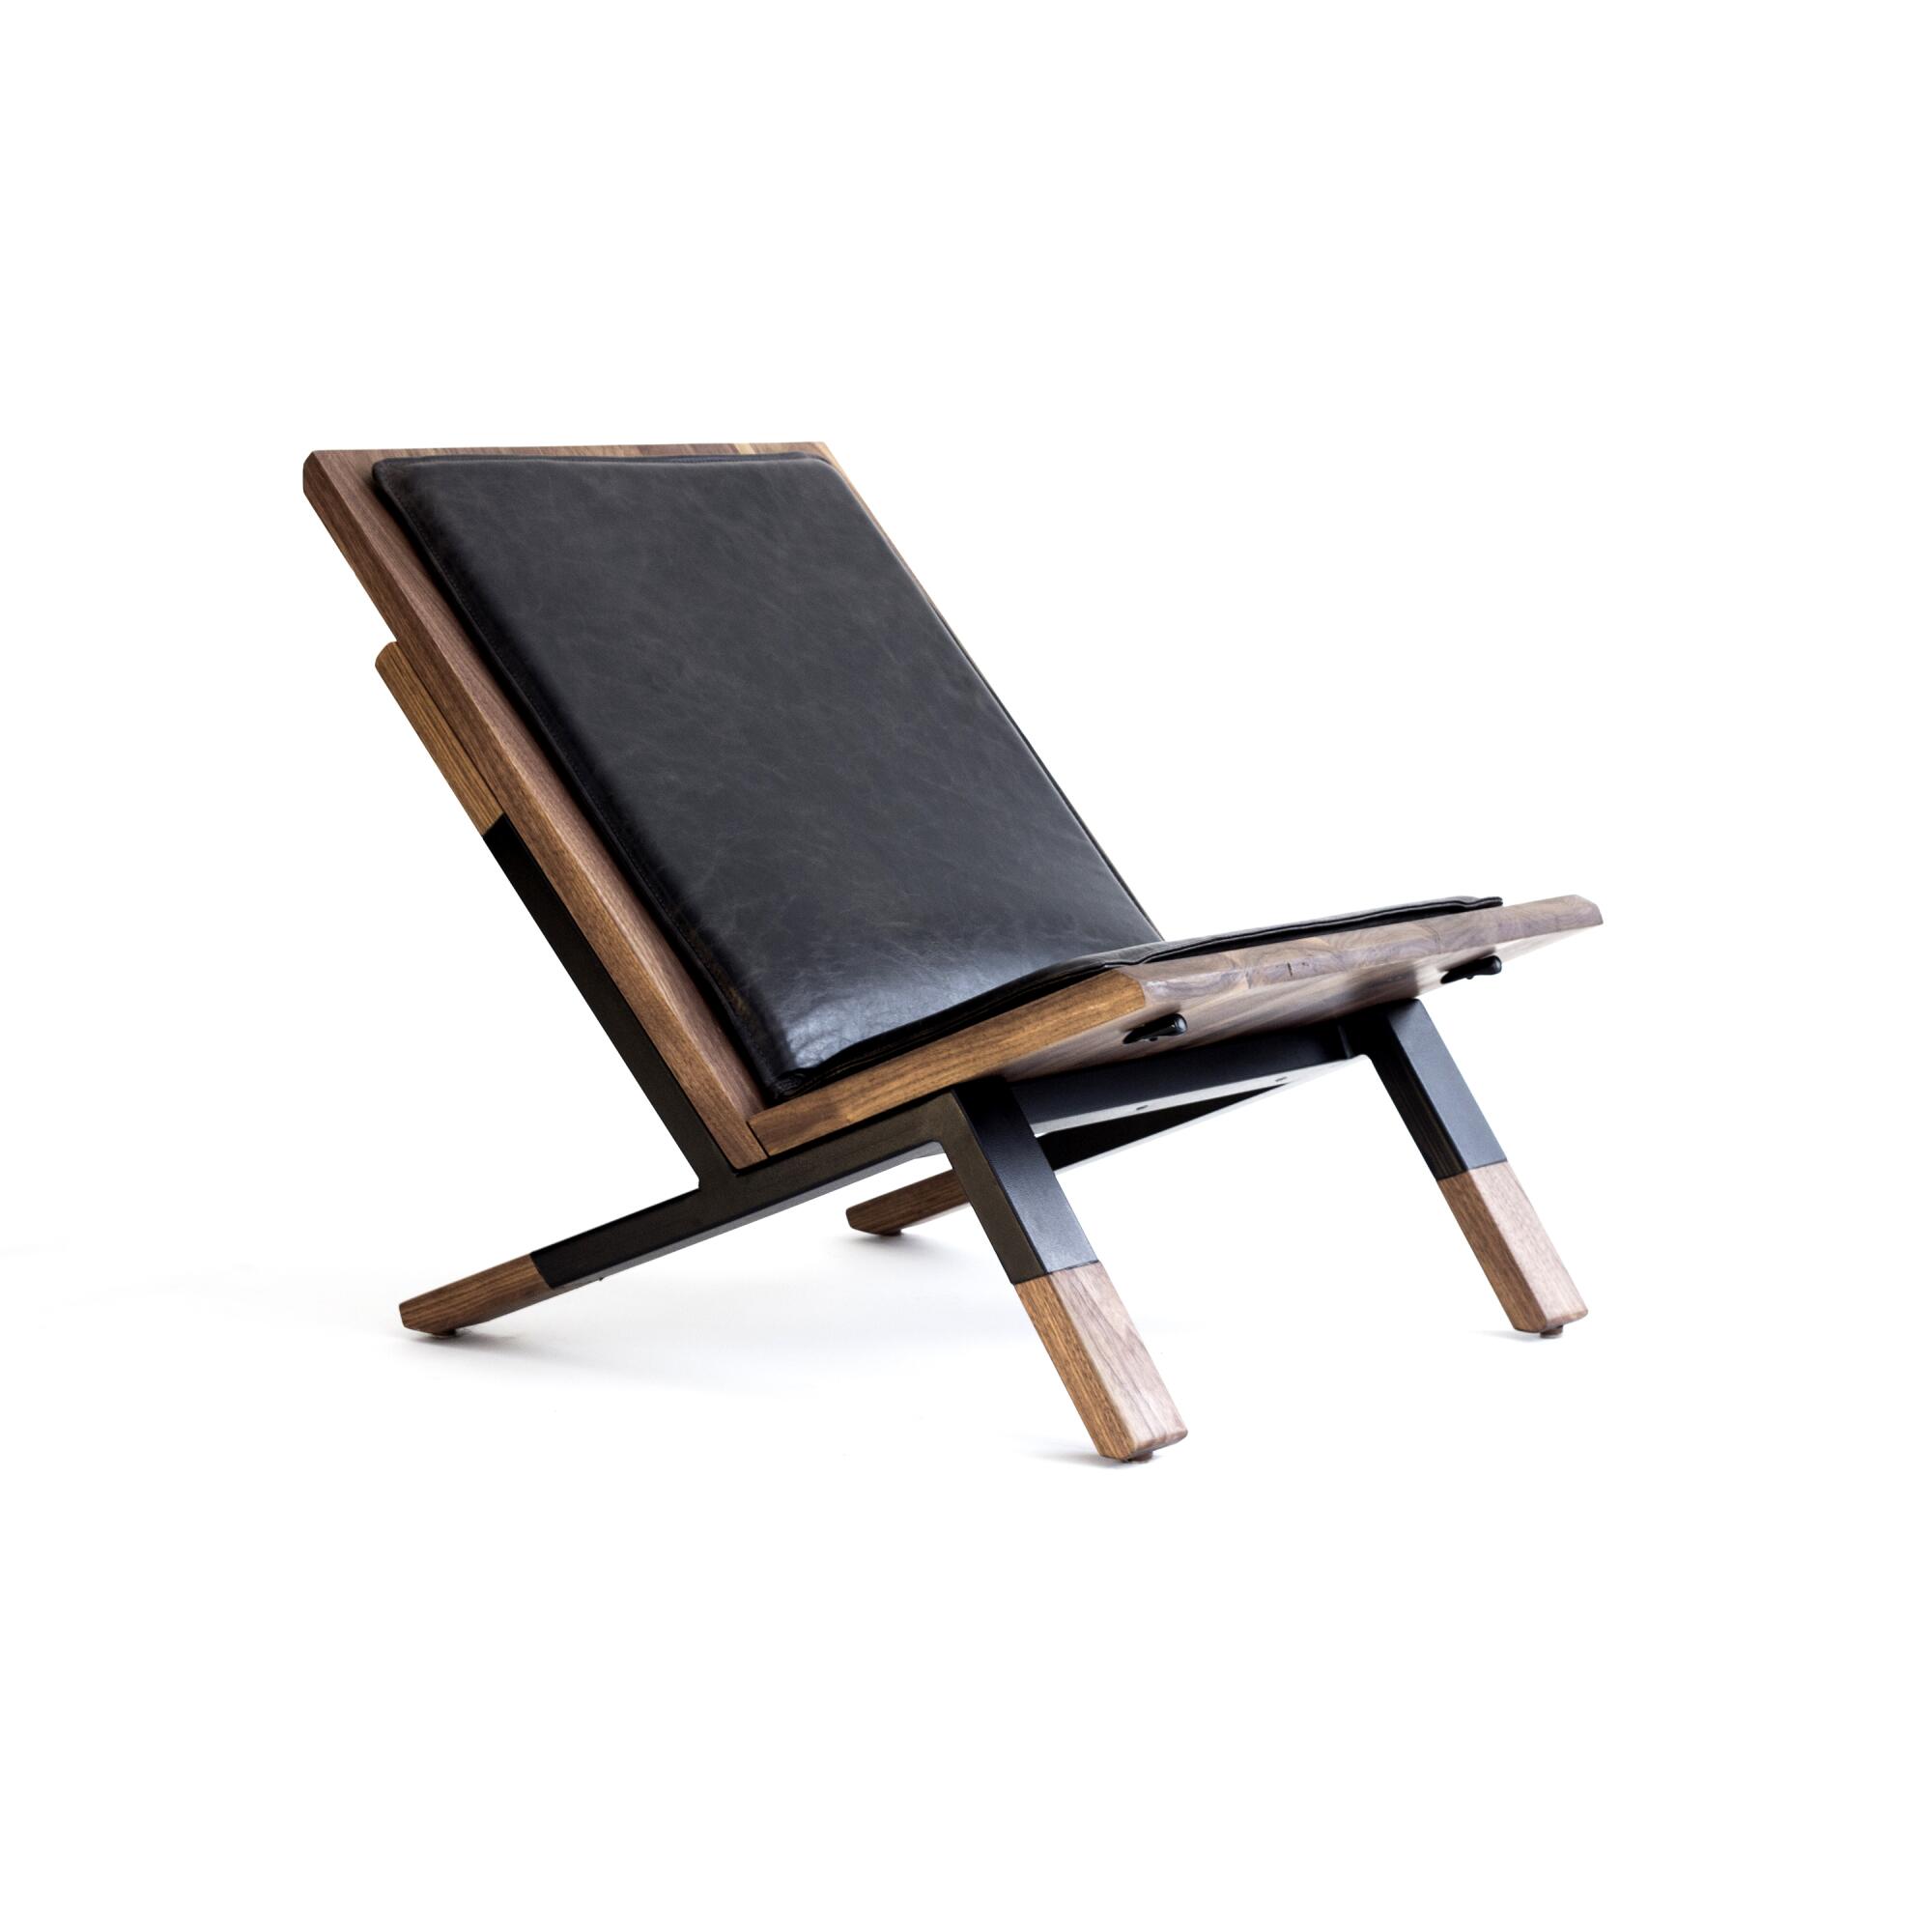 A low-slung chair made with stained wood and black leather is shown against a white background.